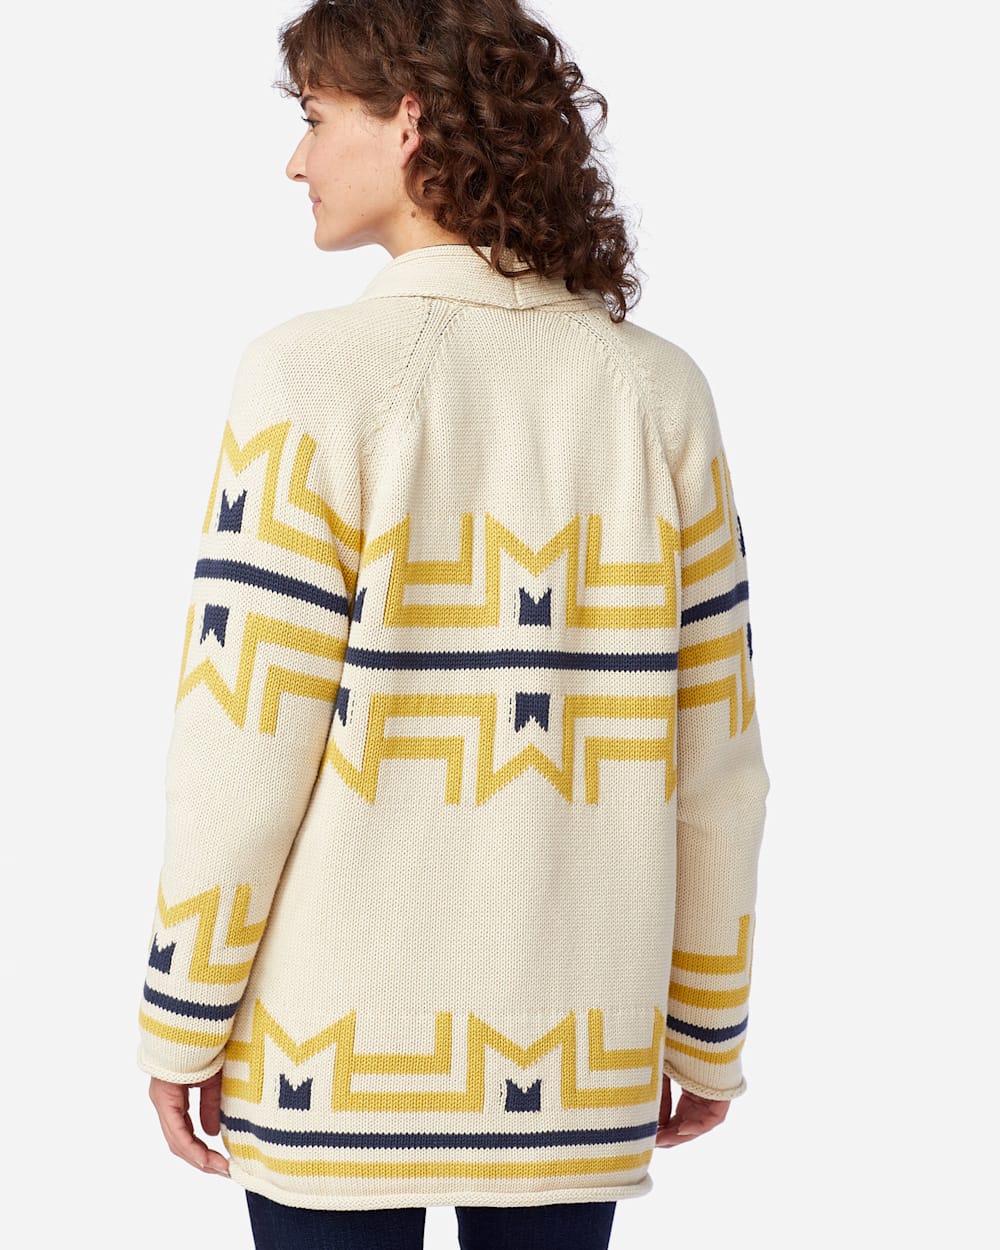 ALTERNATE VIEW OF WOMEN'S ROLLED EDGE COTTON CARDIGAN IN SANDSHELL image number 3